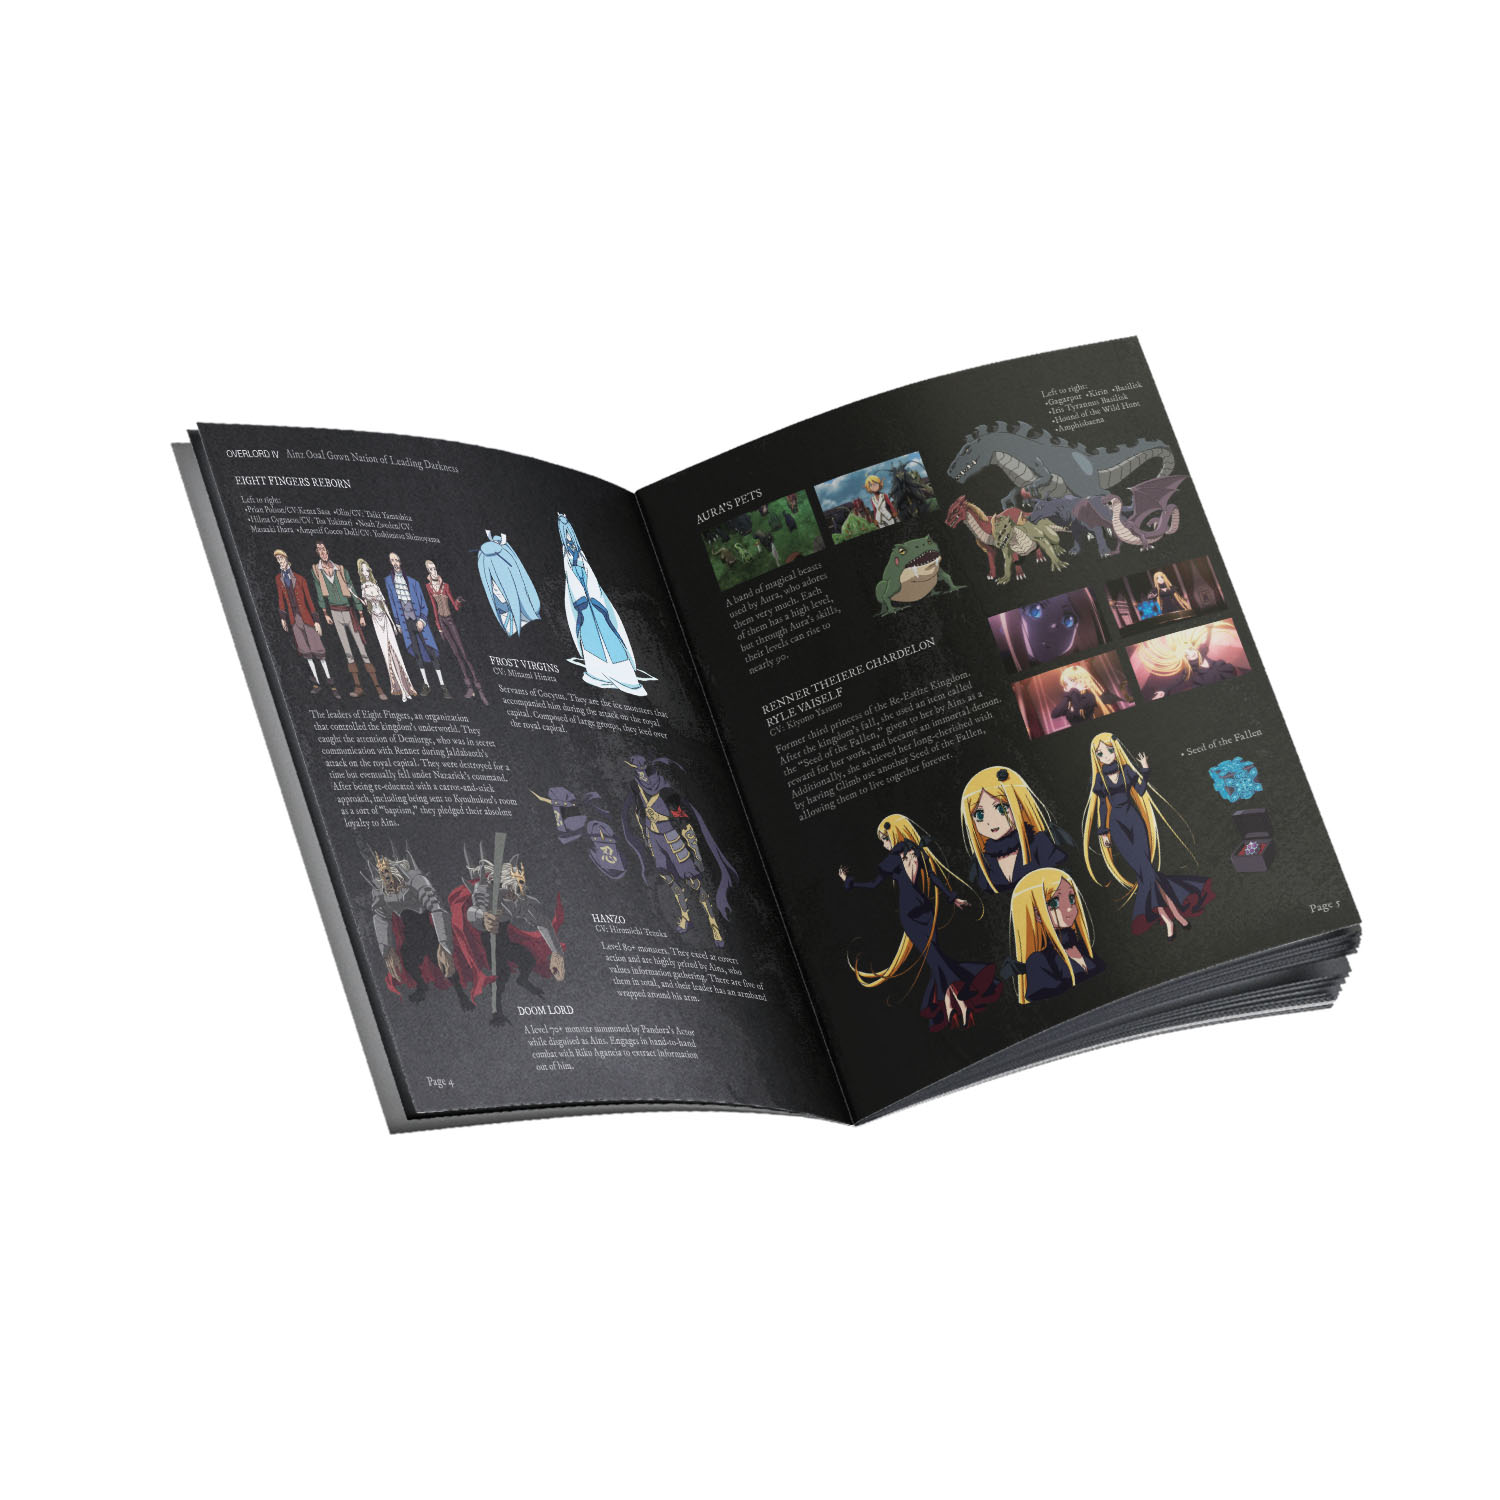 Overlord IV - Season 4 - Blu-ray + DVD - Limited Edition image count 5